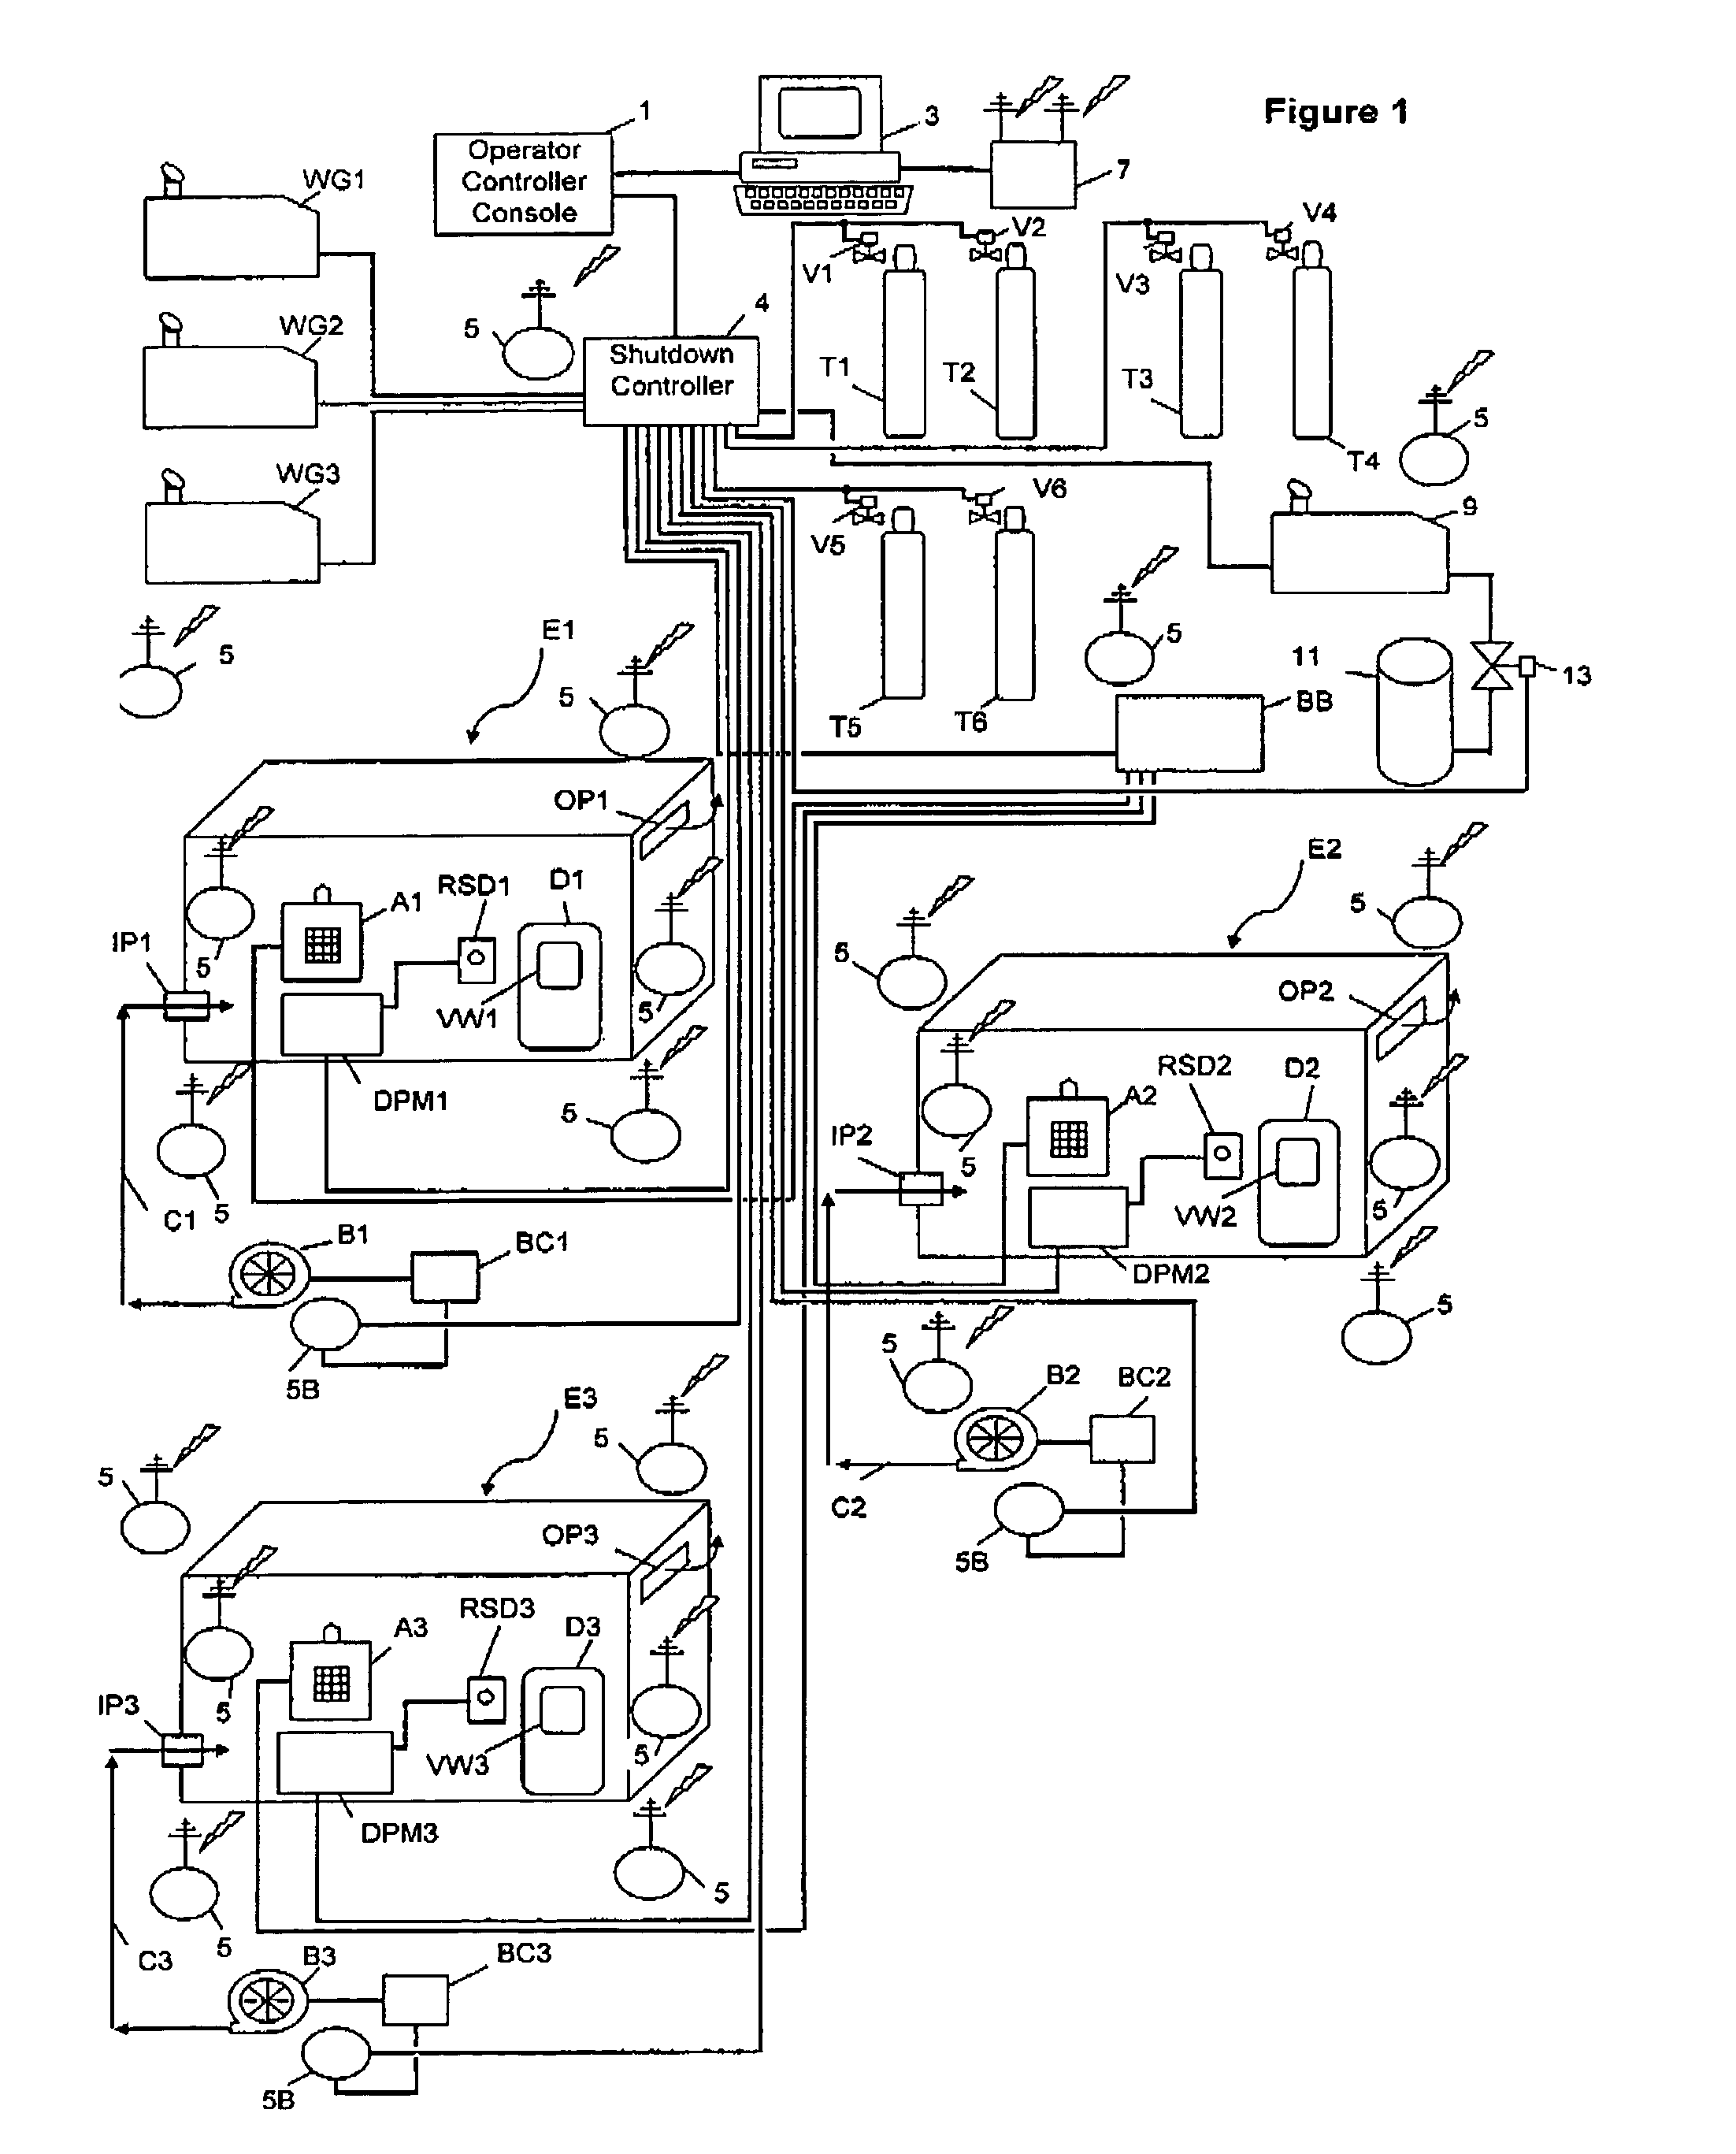 Enclosure system for hot work within the vicinity of flammable or combustible material